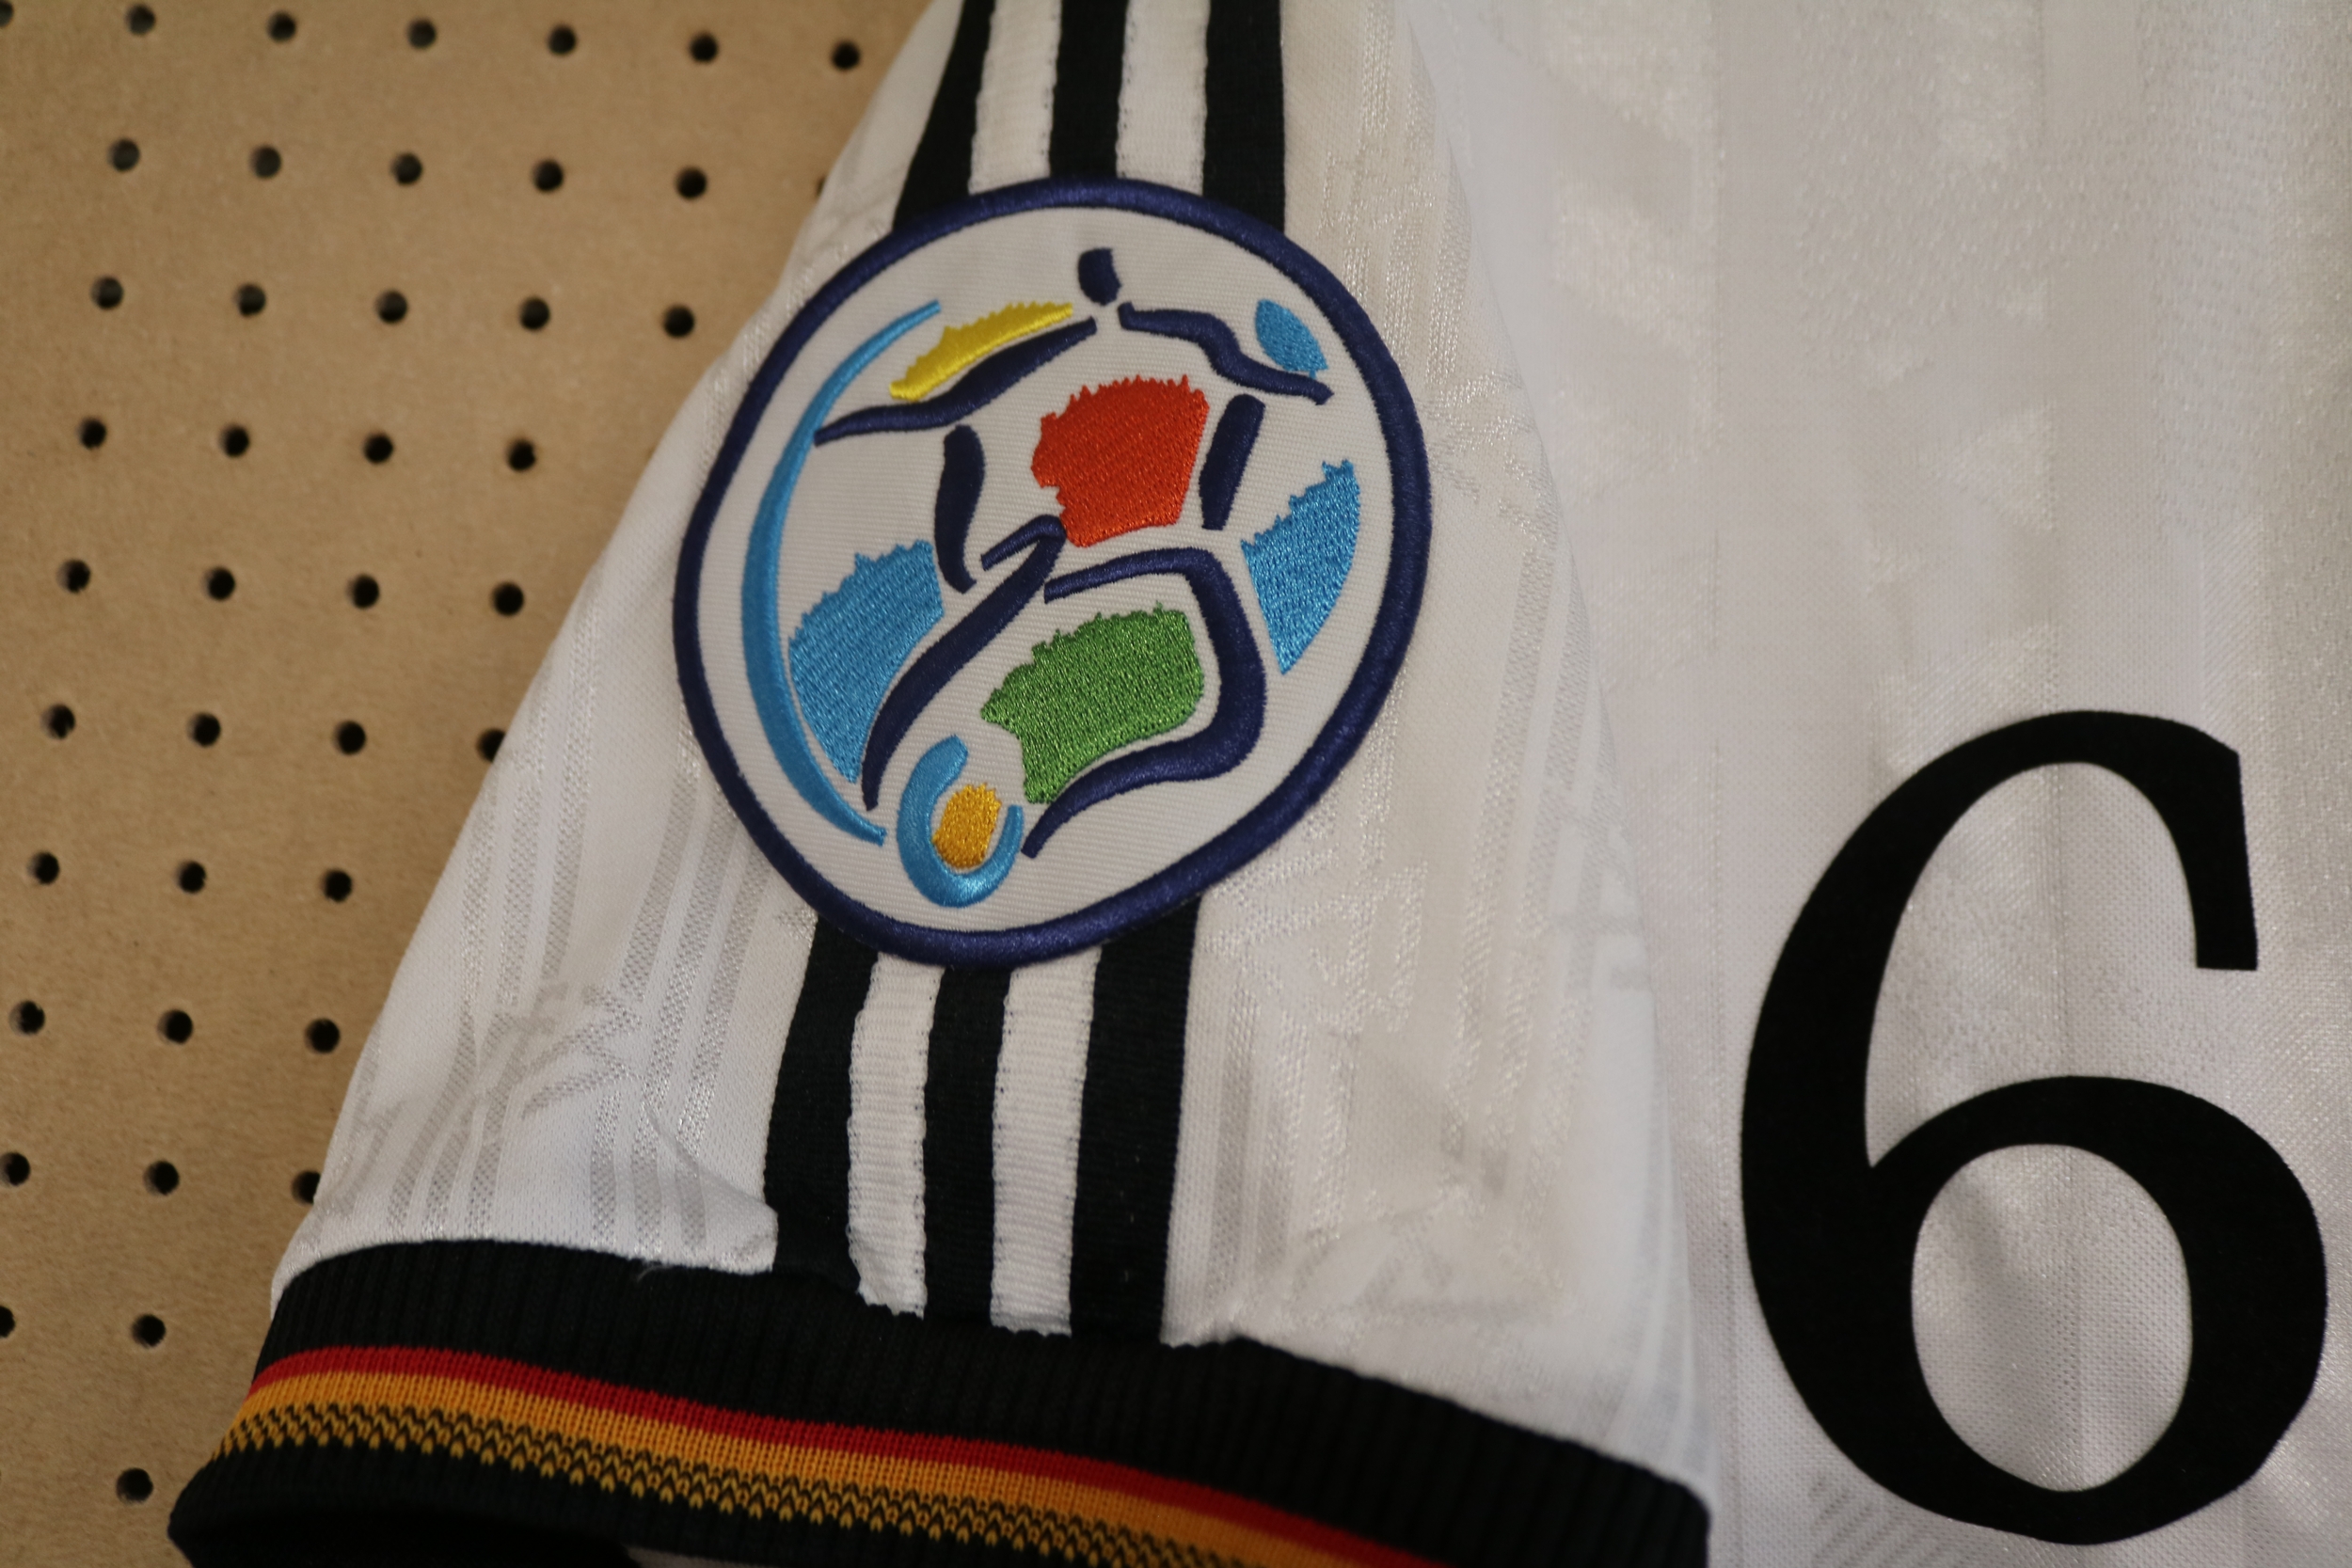 MATTHIAS SAMMER UEFA EURO 1996 MATCH WORN GERMANY JERSEY An Adidas white #6 jersey which was worn by - Image 4 of 5